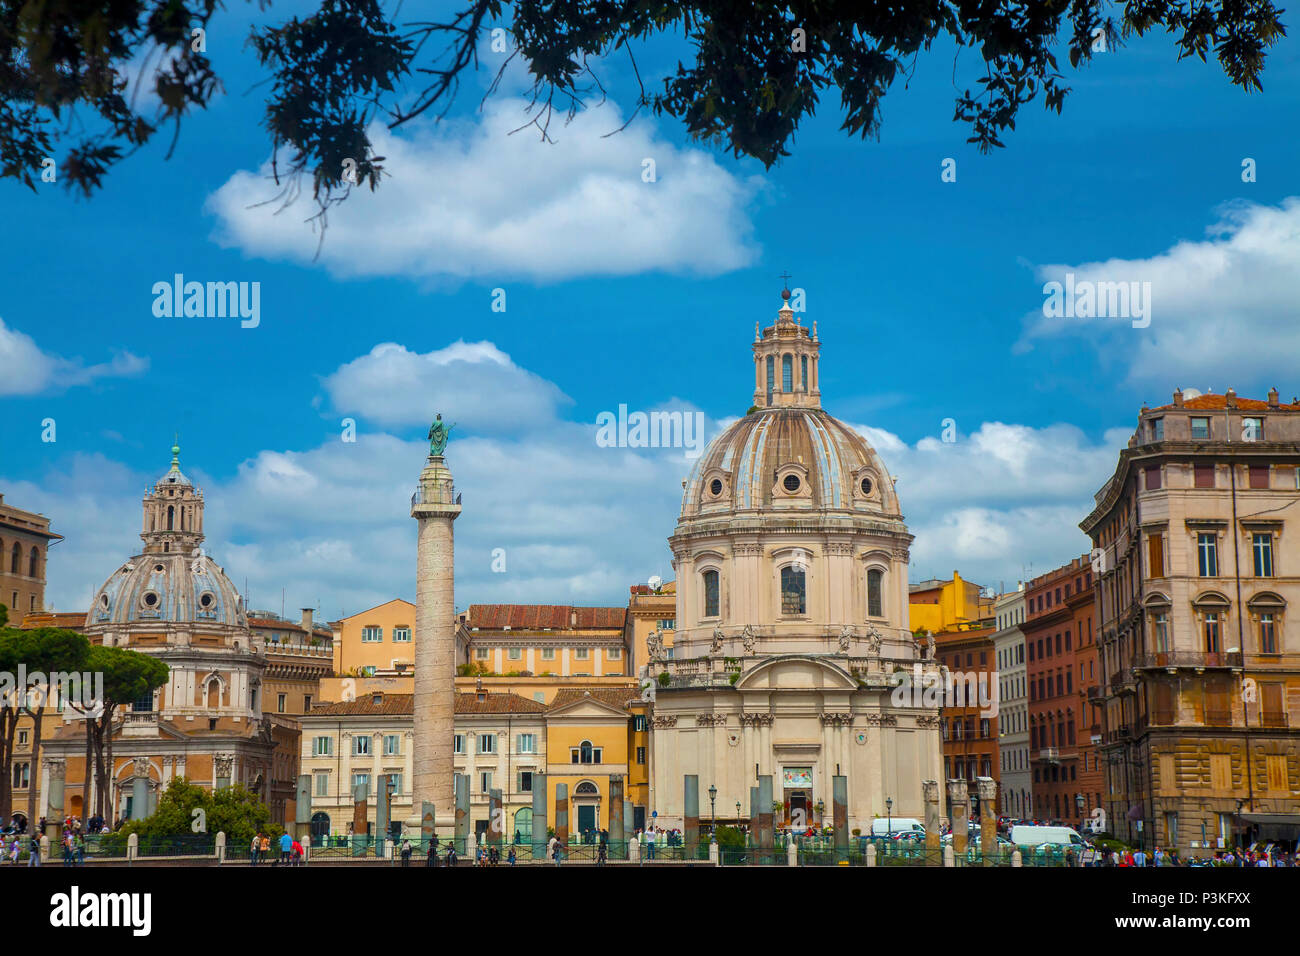 Trajan's Column in Rome, Italy with the two Churches of Holy Mary on its sides Stock Photo